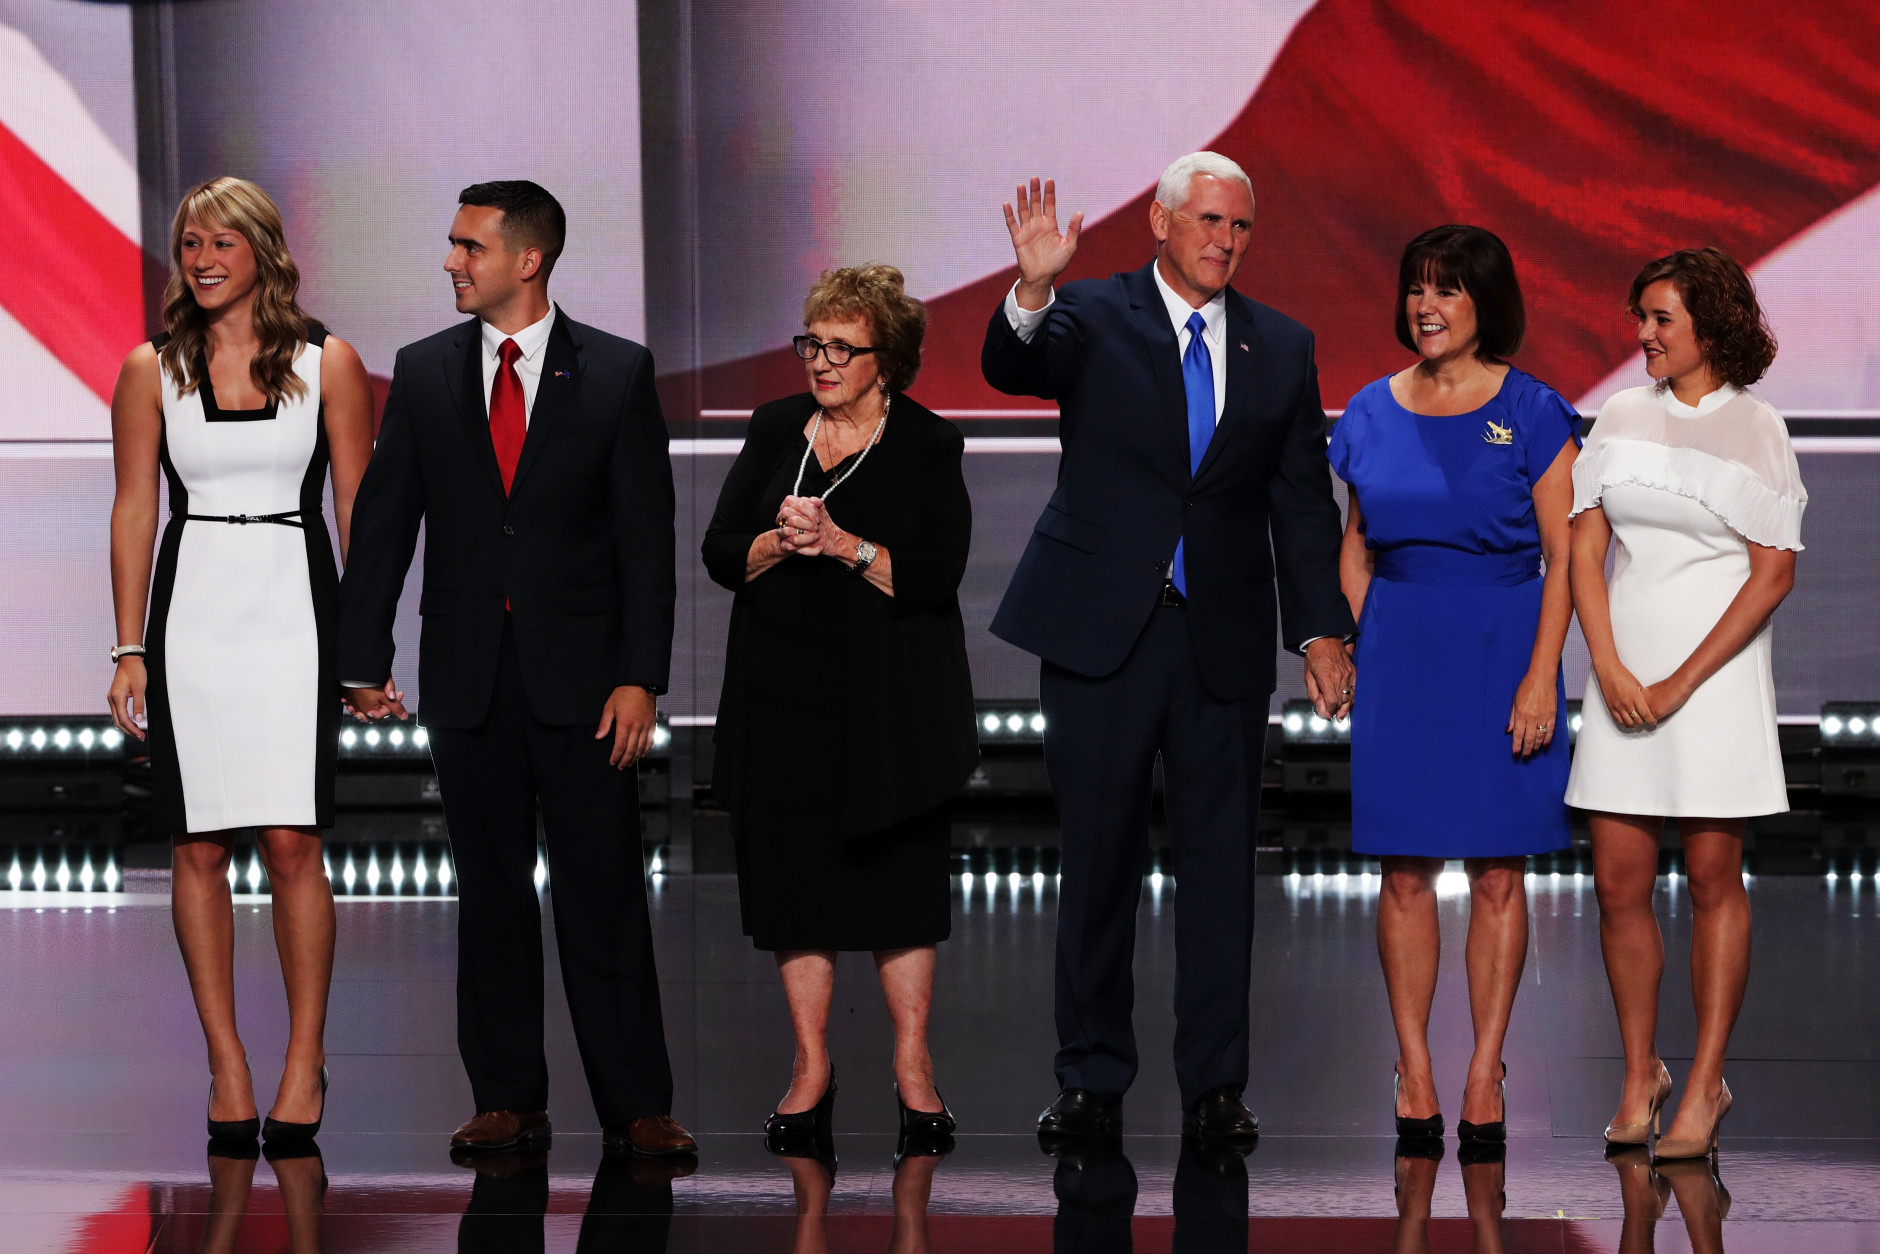 CLEVELAND, OH - JULY 20:  Republican vice presidential candidate Mike Pence (3rd-R) along with his mother Nancy Pence (3rd-R), daughter Audrey Pence (L), son Michael Pence (2nd-L), wife Karen Pence (2nd-R) and daughter Charlotte Pence (R) acknowledge the crowd on the third day of the Republican National Convention on July 20, 2016 at the Quicken Loans Arena in Cleveland, Ohio. Republican presidential candidate Donald Trump received the number of votes needed to secure the party's nomination. An estimated 50,000 people are expected in Cleveland, including hundreds of protesters and members of the media. The four-day Republican National Convention kicked off on July 18.  (Photo by Alex Wong/Getty Images)